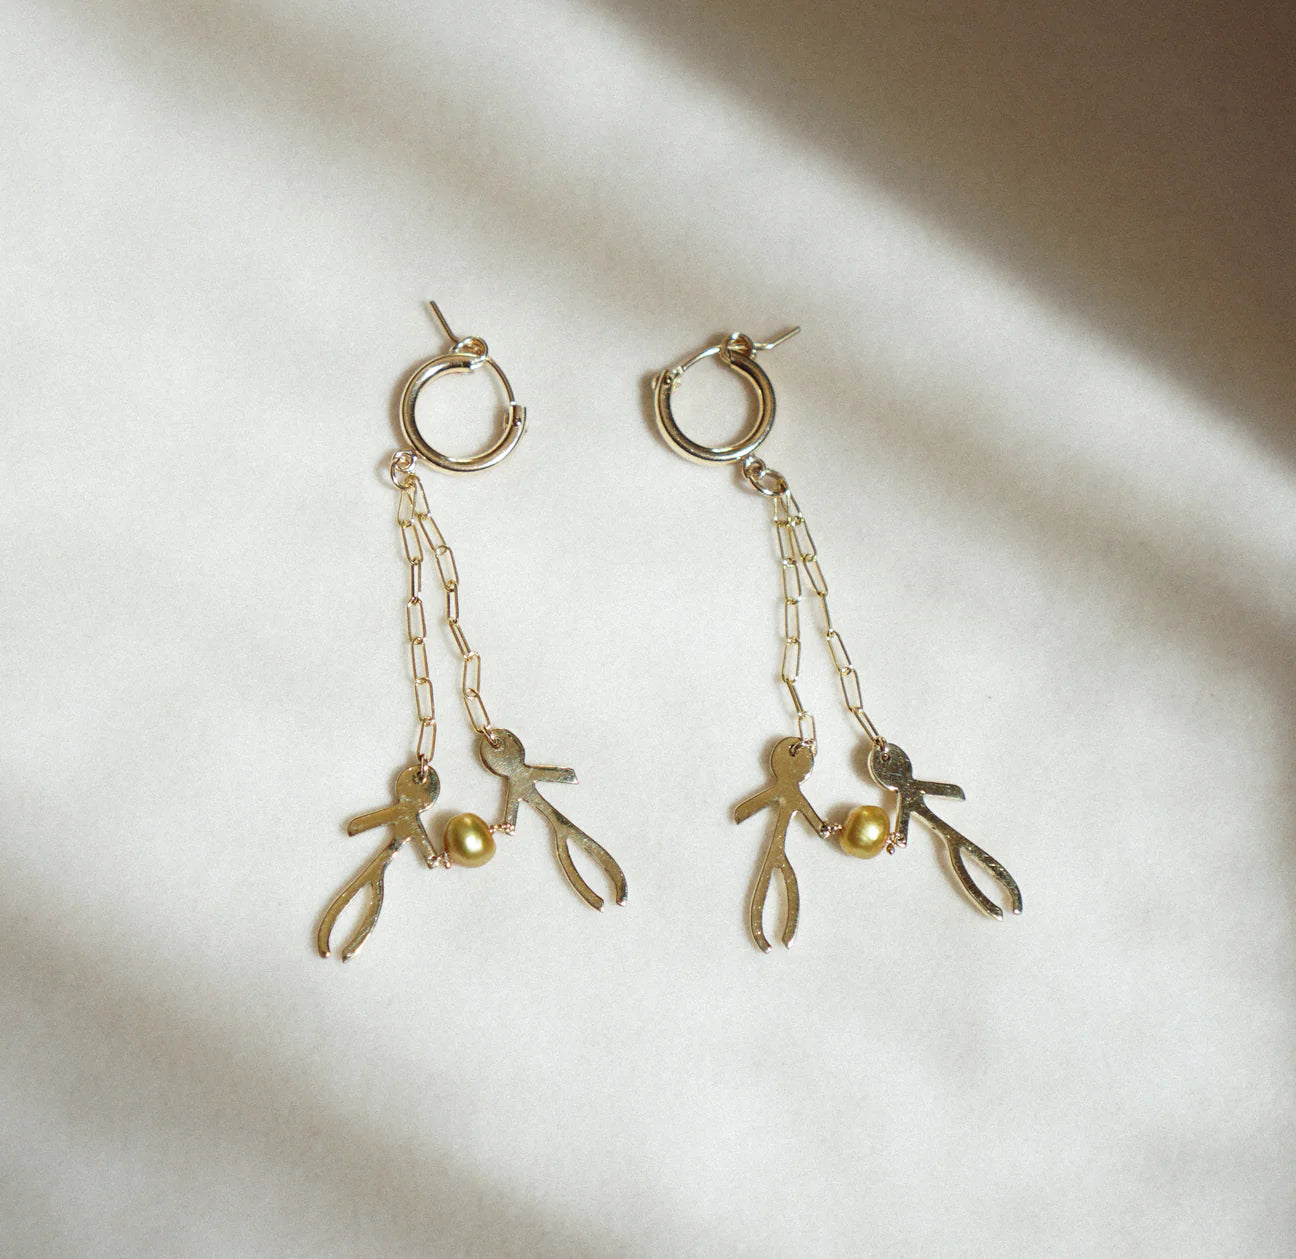 ANTING ANTING: TAO TAO / PEACE EARRINGS - GOLD FILL/BRASS